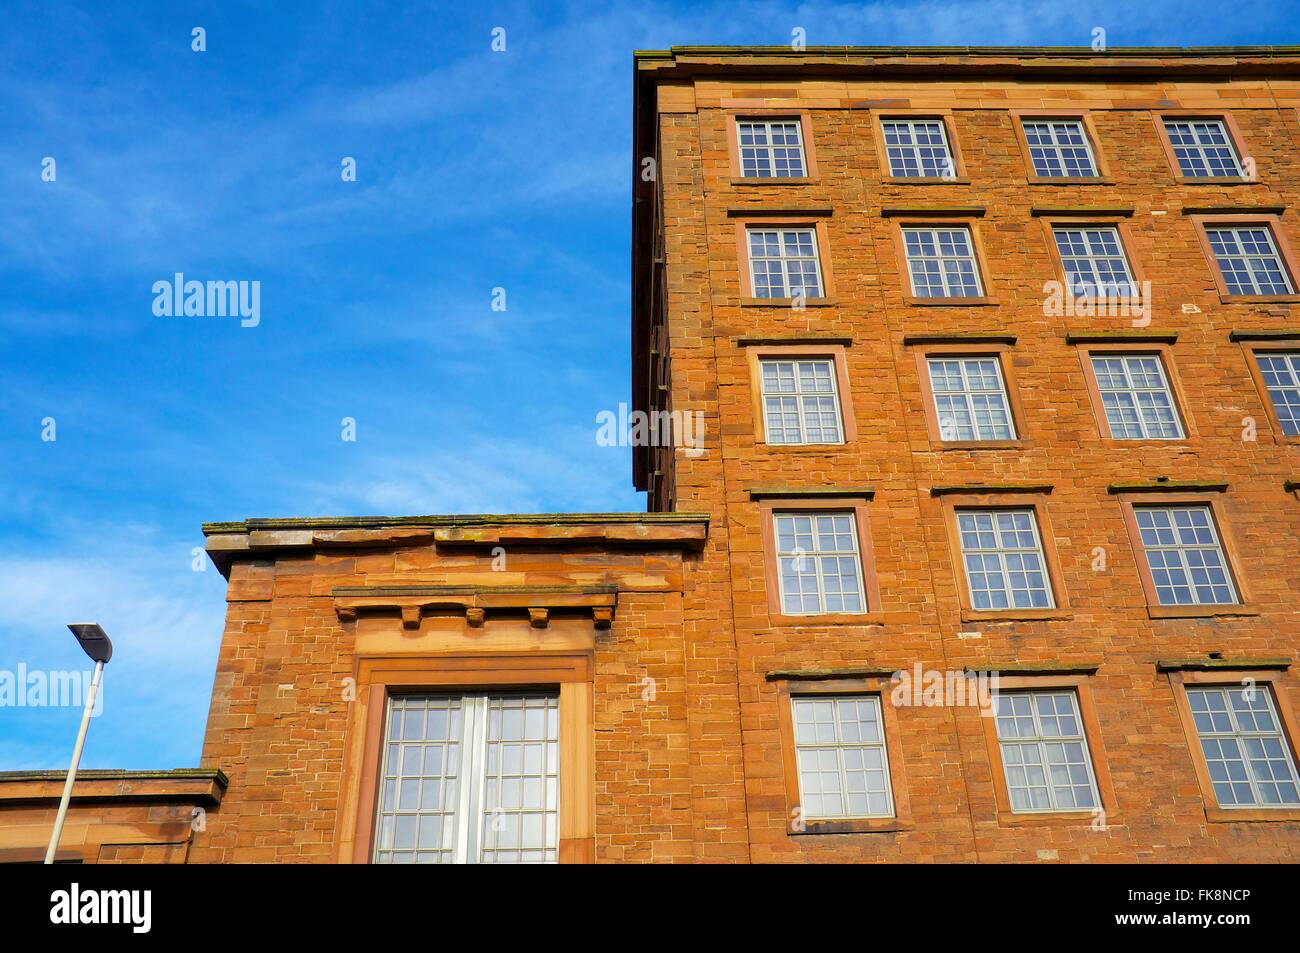 Shaddon Mill. Ancienne usine textile Junction Street, Shaddongate, Cumbria, Carlisle, Angleterre, Royaume-Uni, Europe. Banque D'Images